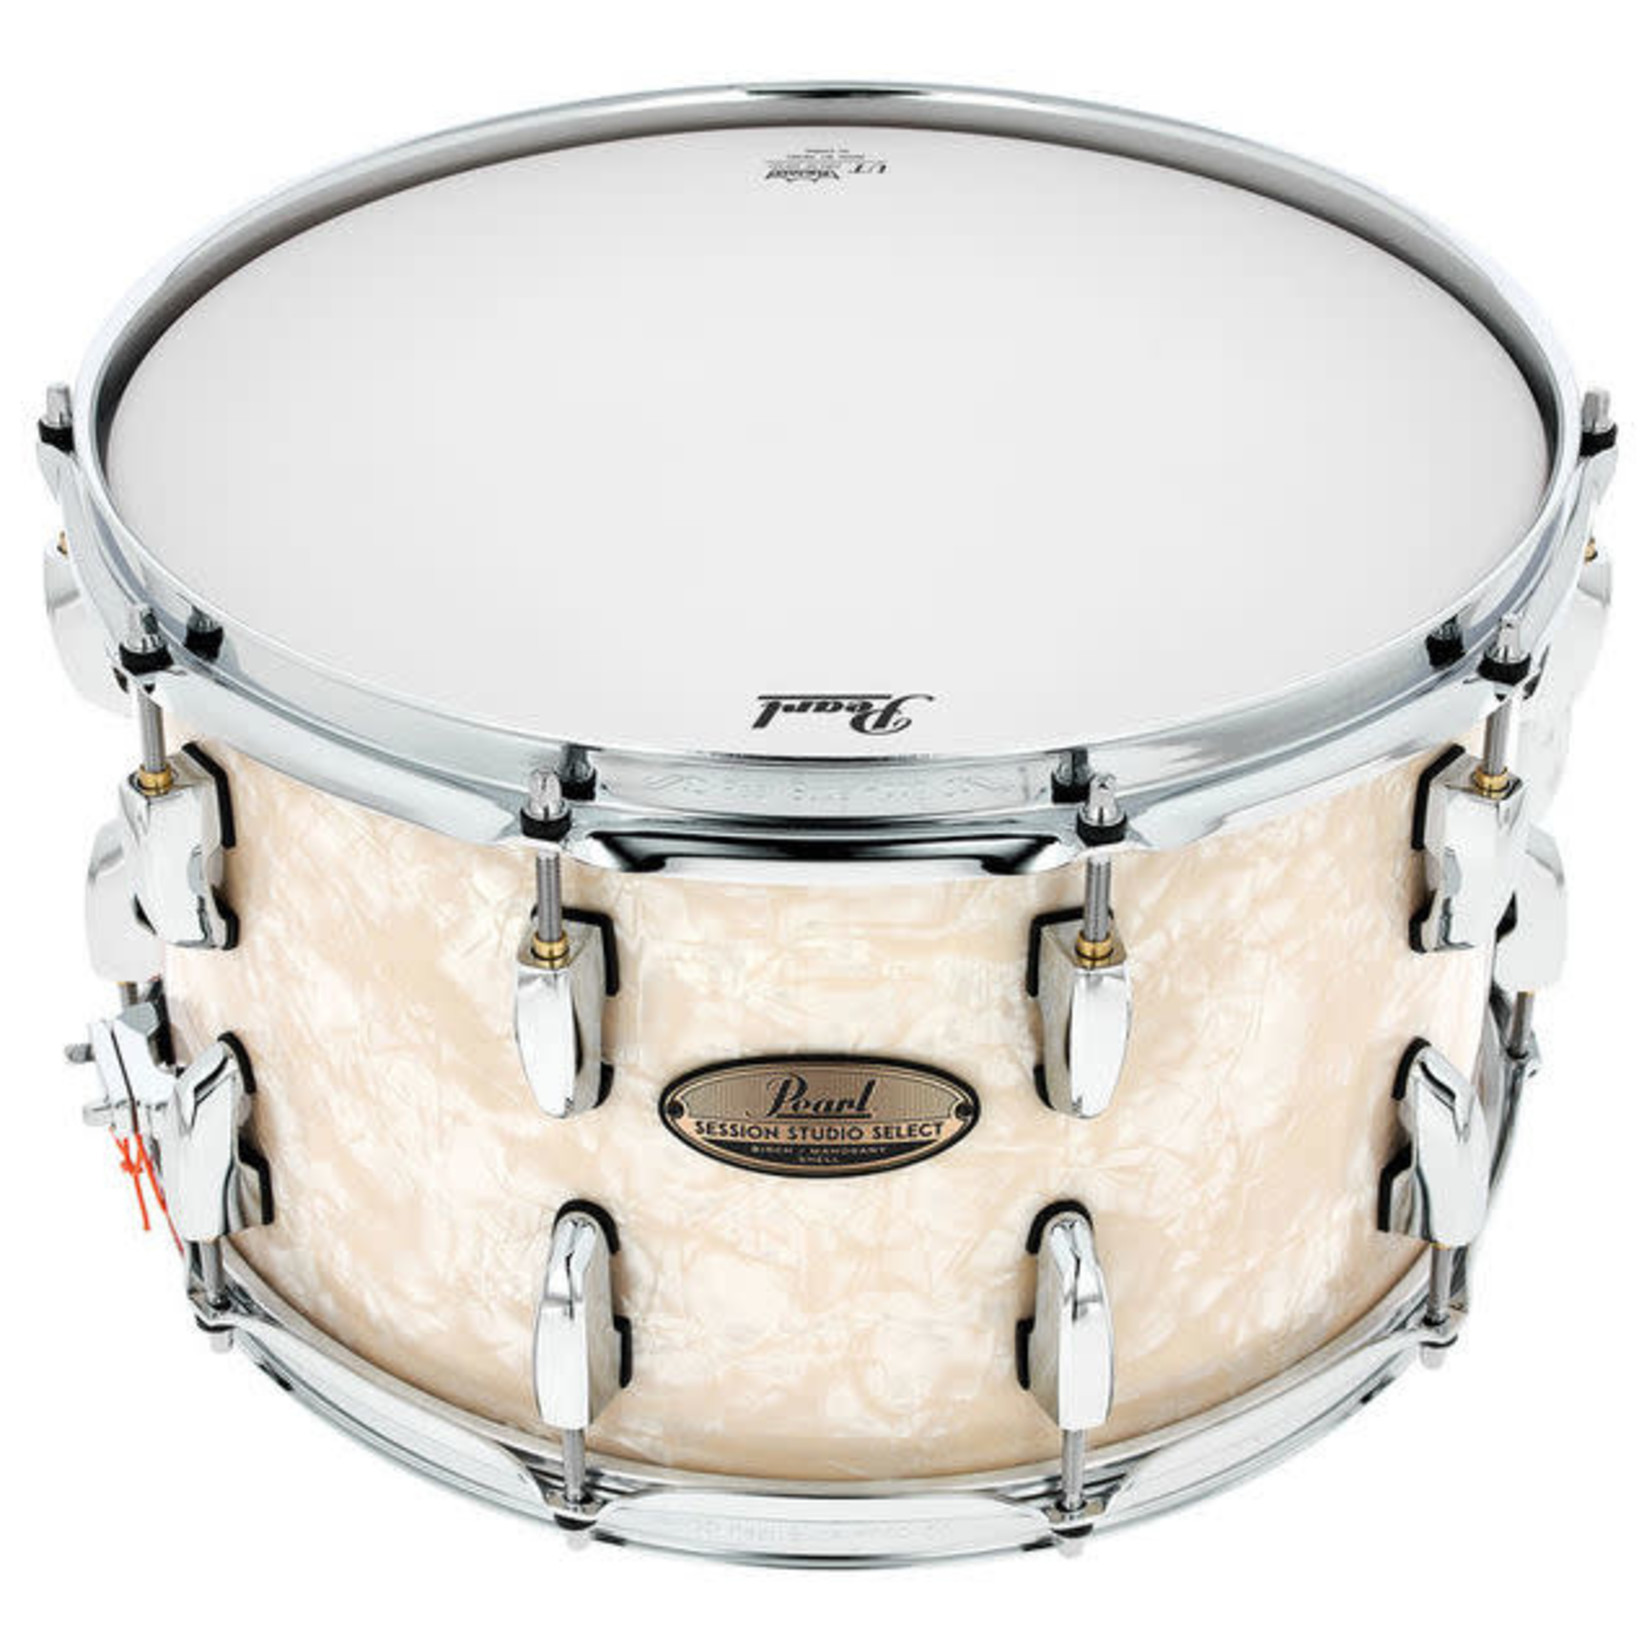 Pearl Pearl Session Studio Select 8x14" Snare Drum STS1480S/C405 (Nicotine White Marine Pearl)